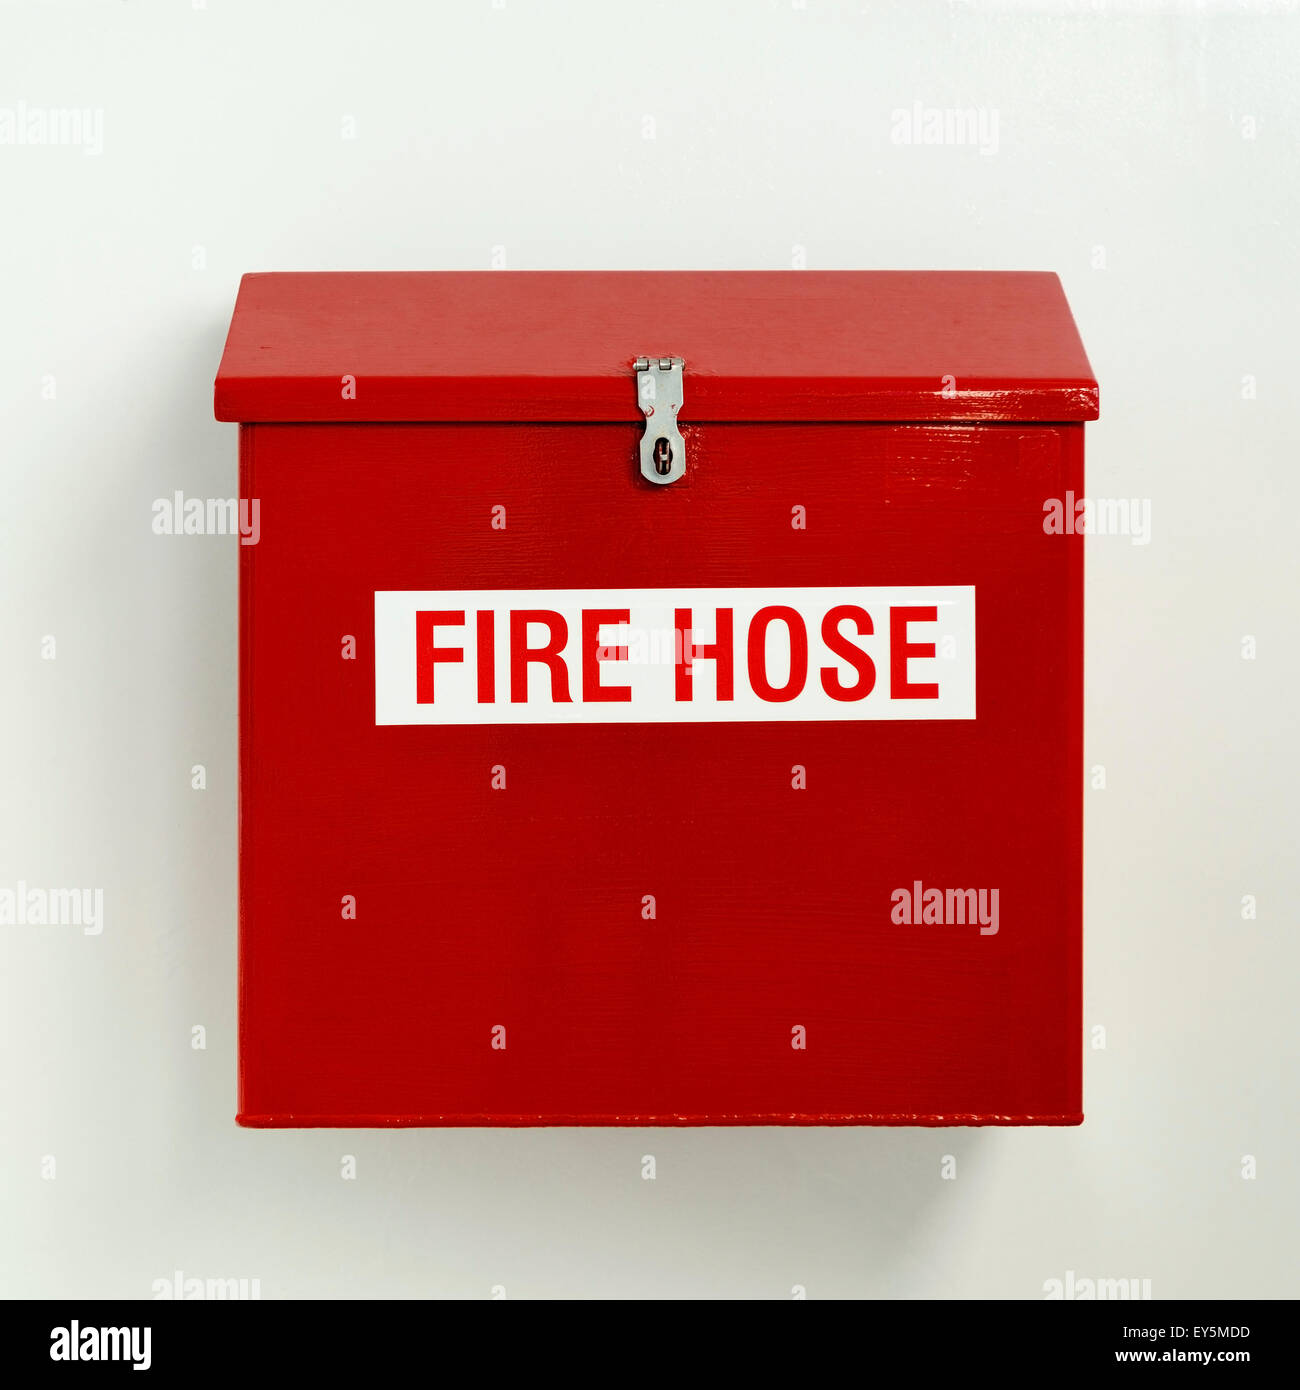 Fire hose box in bright red hung on white wall Stock Photo